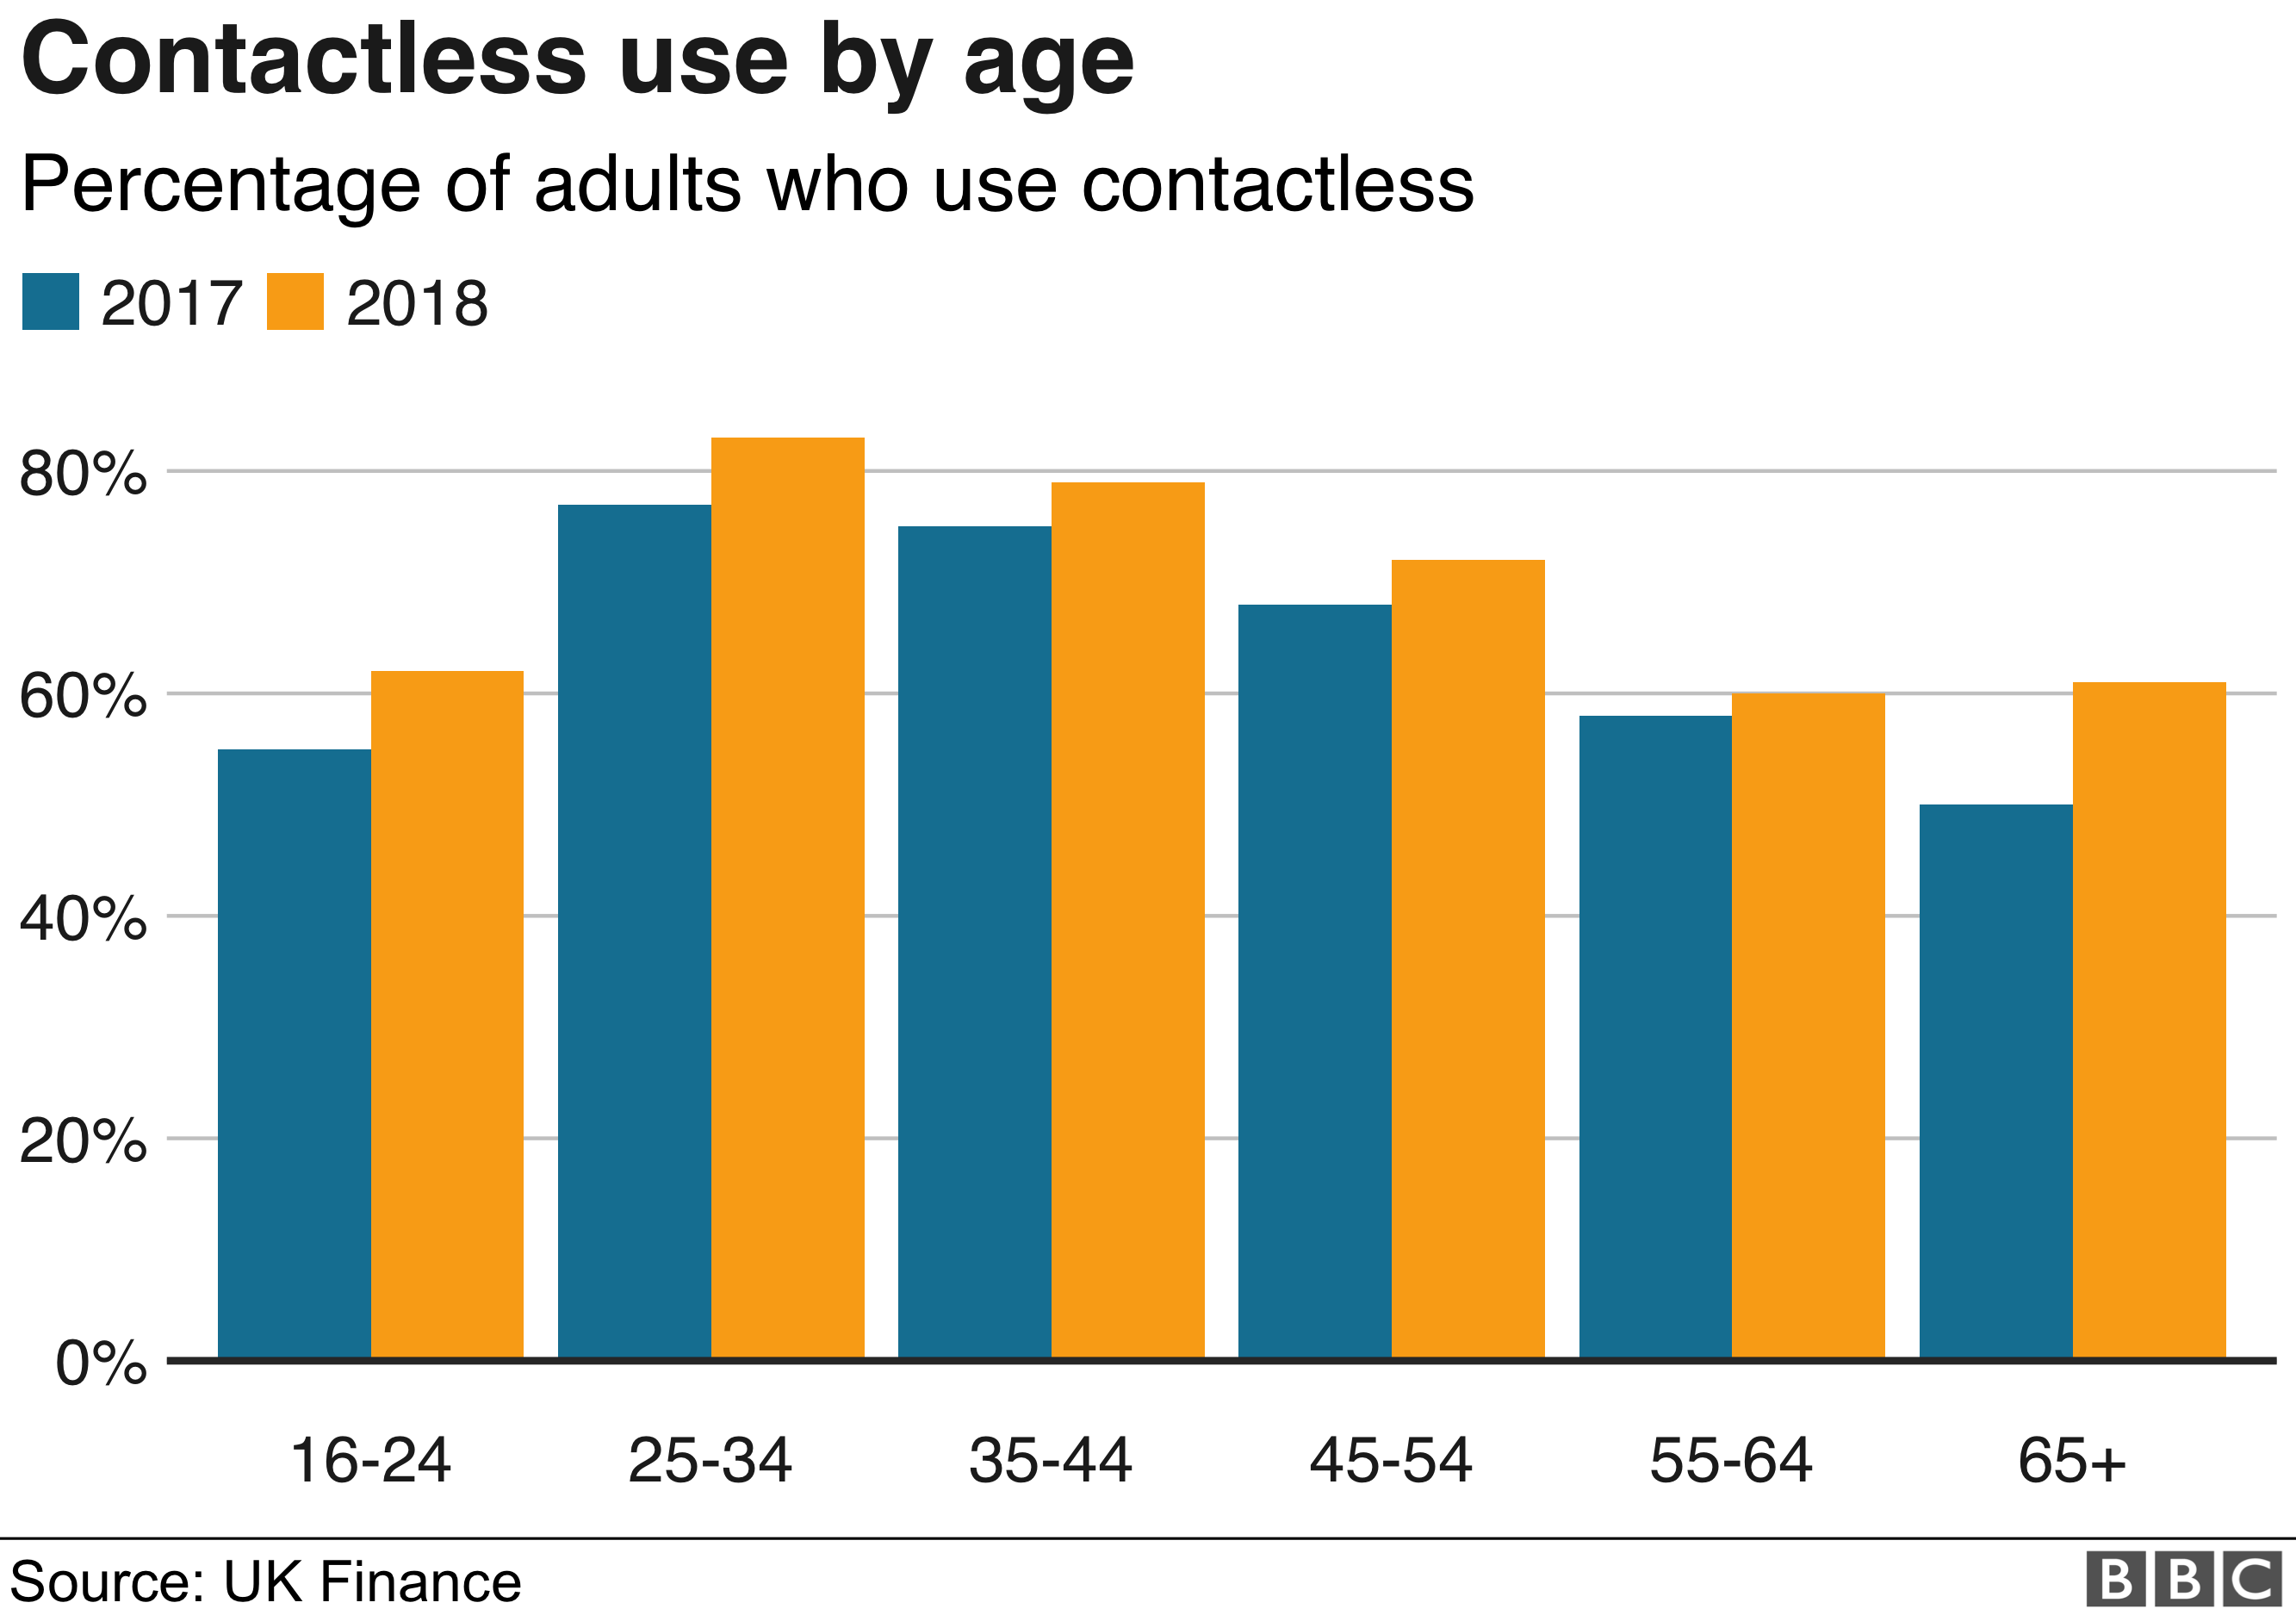 Contactless use by age graphic